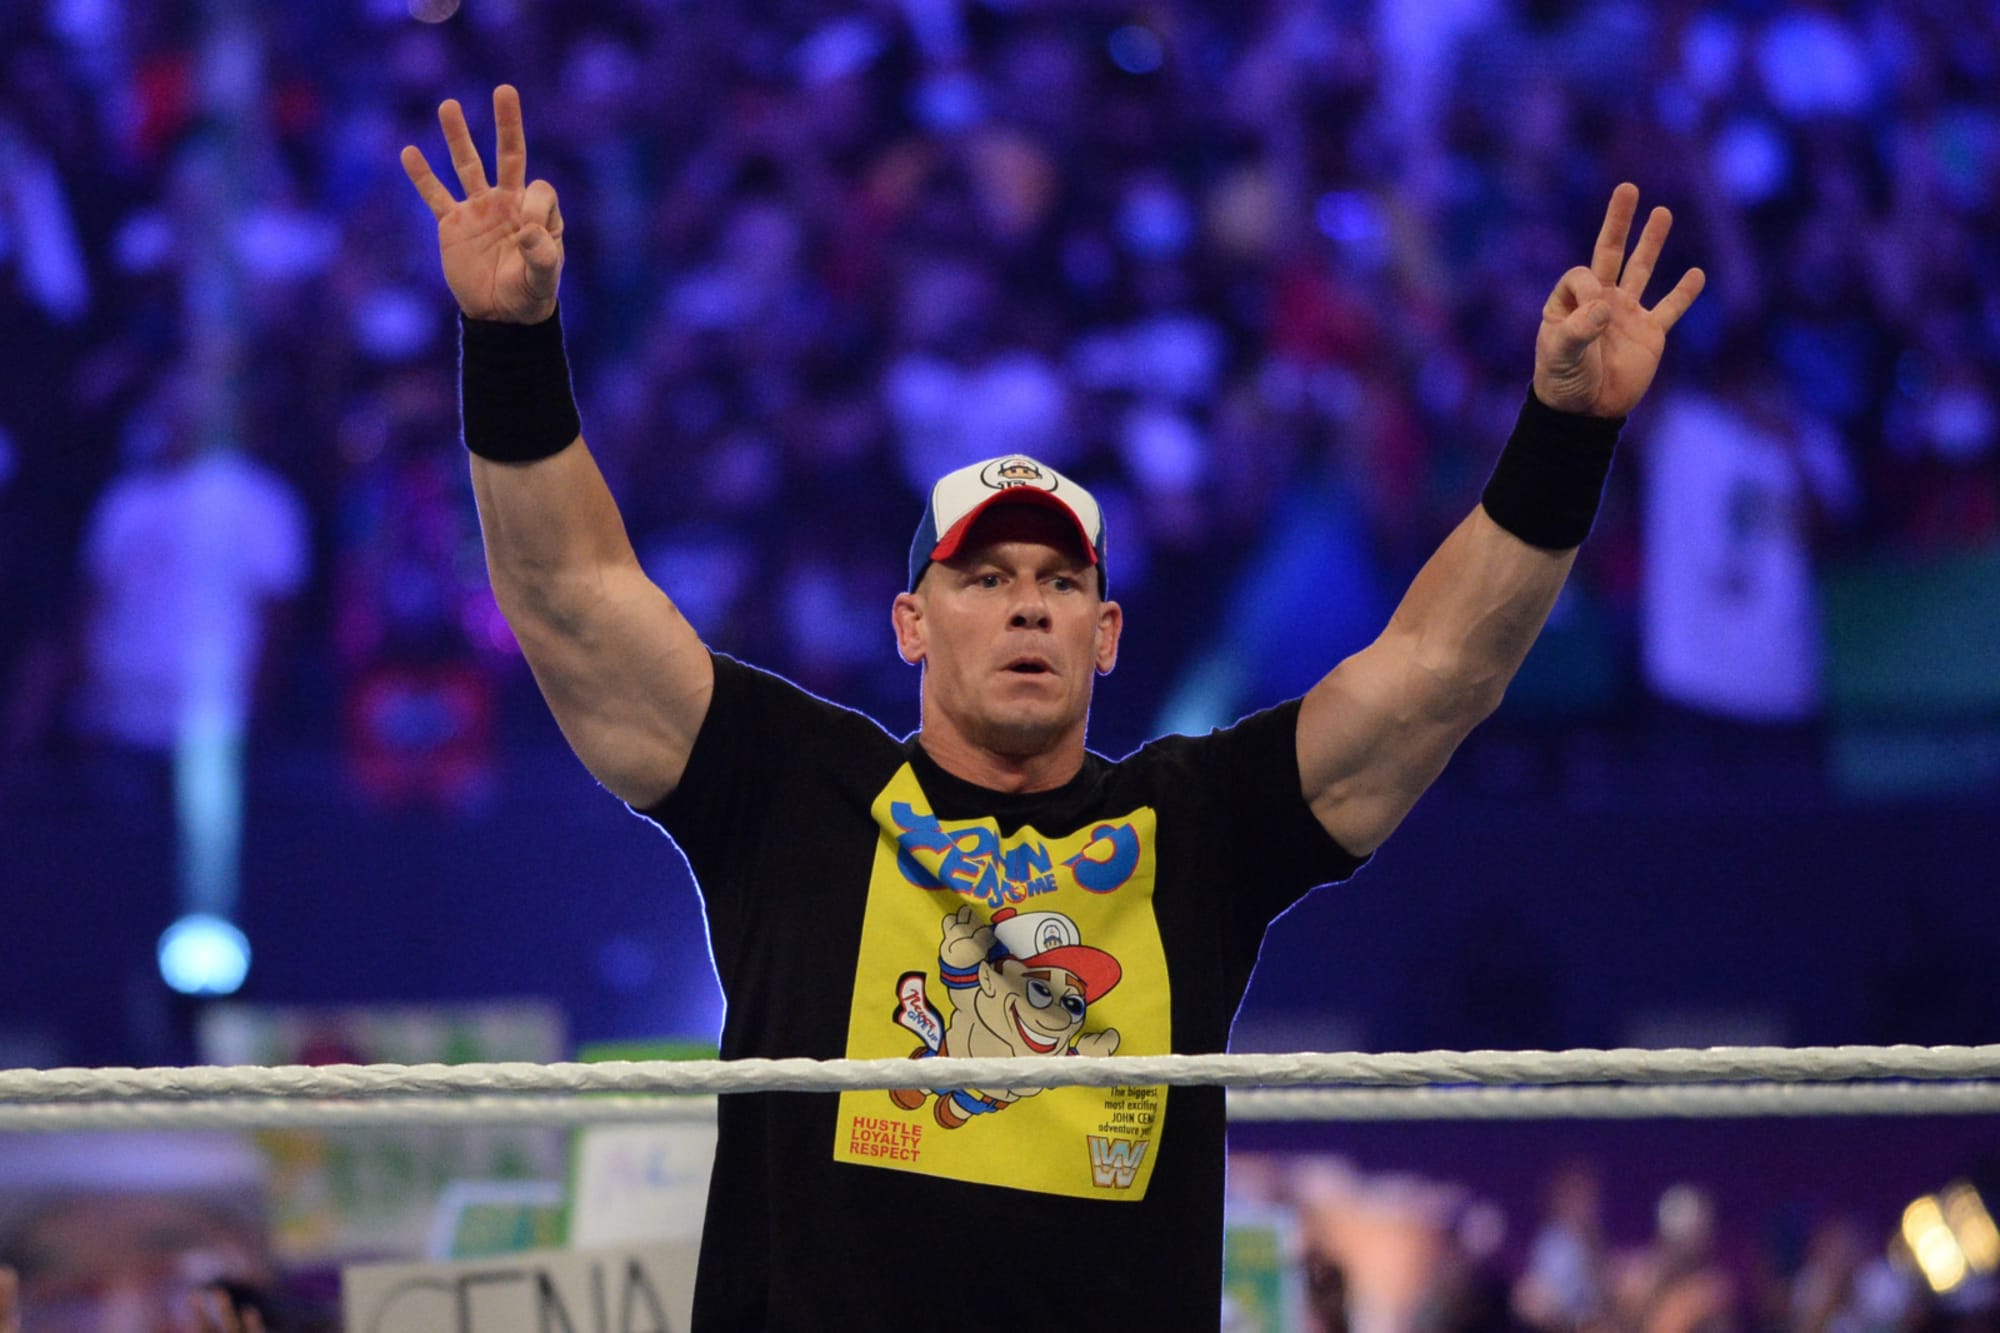 John Cena expected to compete at WrestleMania 39